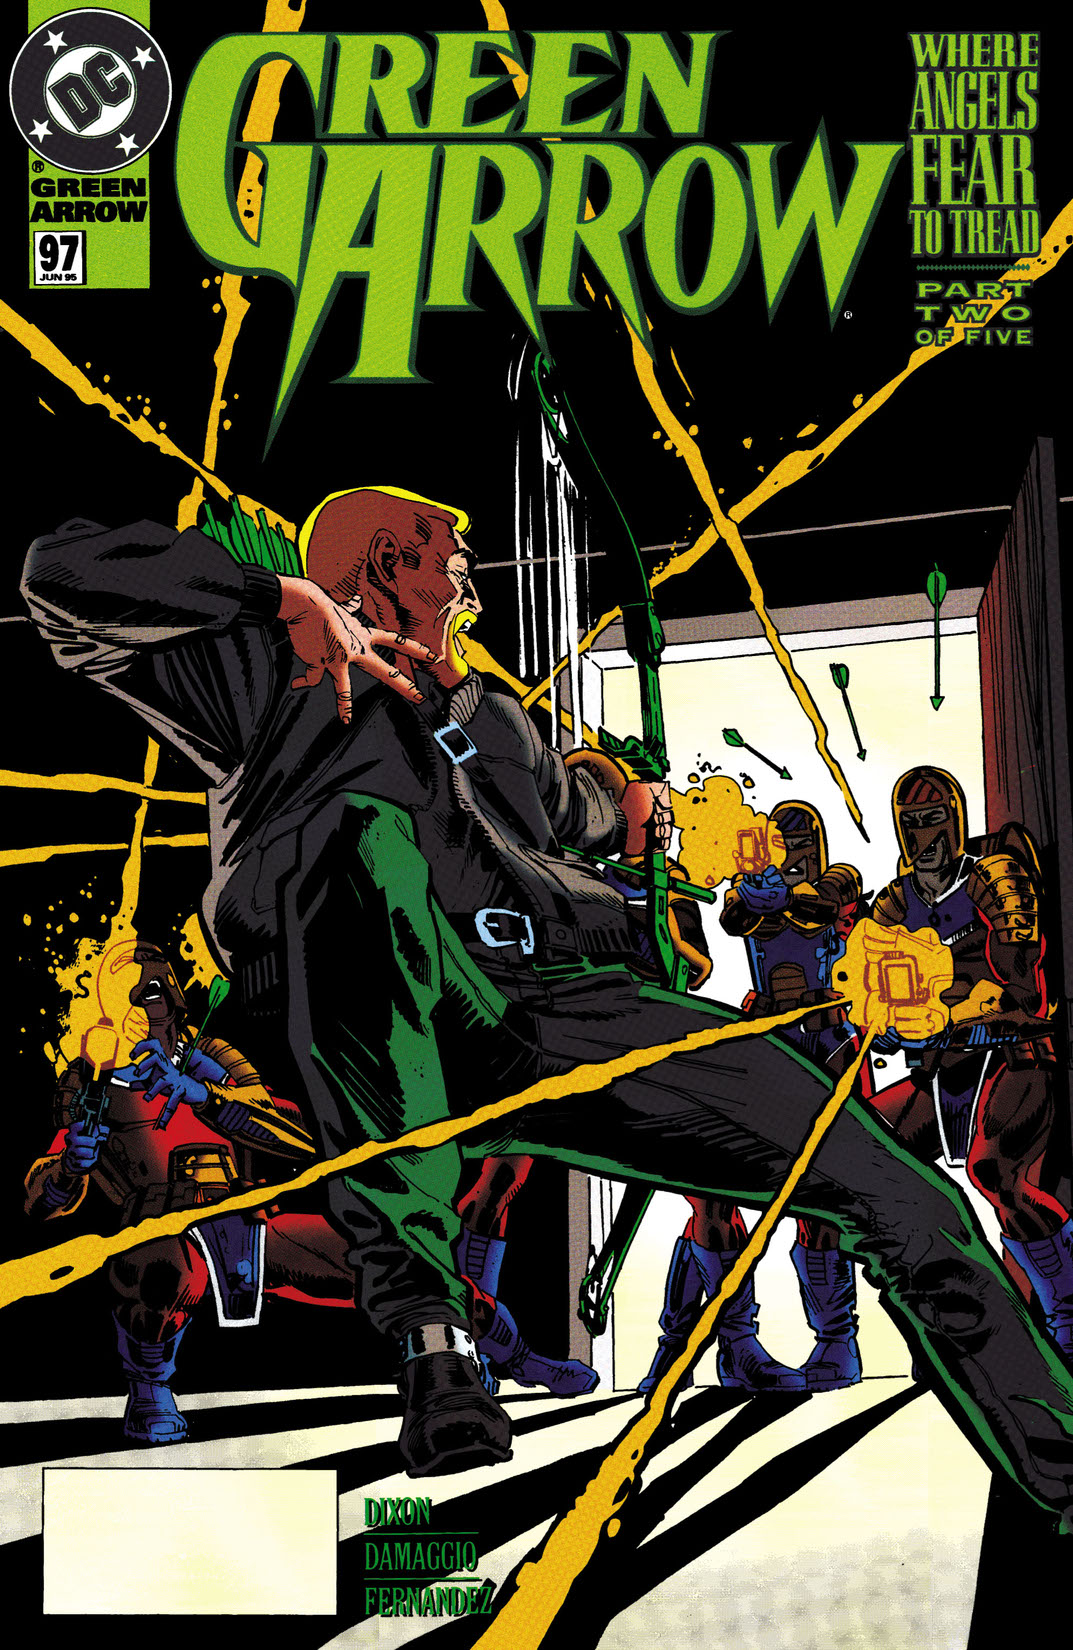 Green Arrow (1987-) #97 preview images